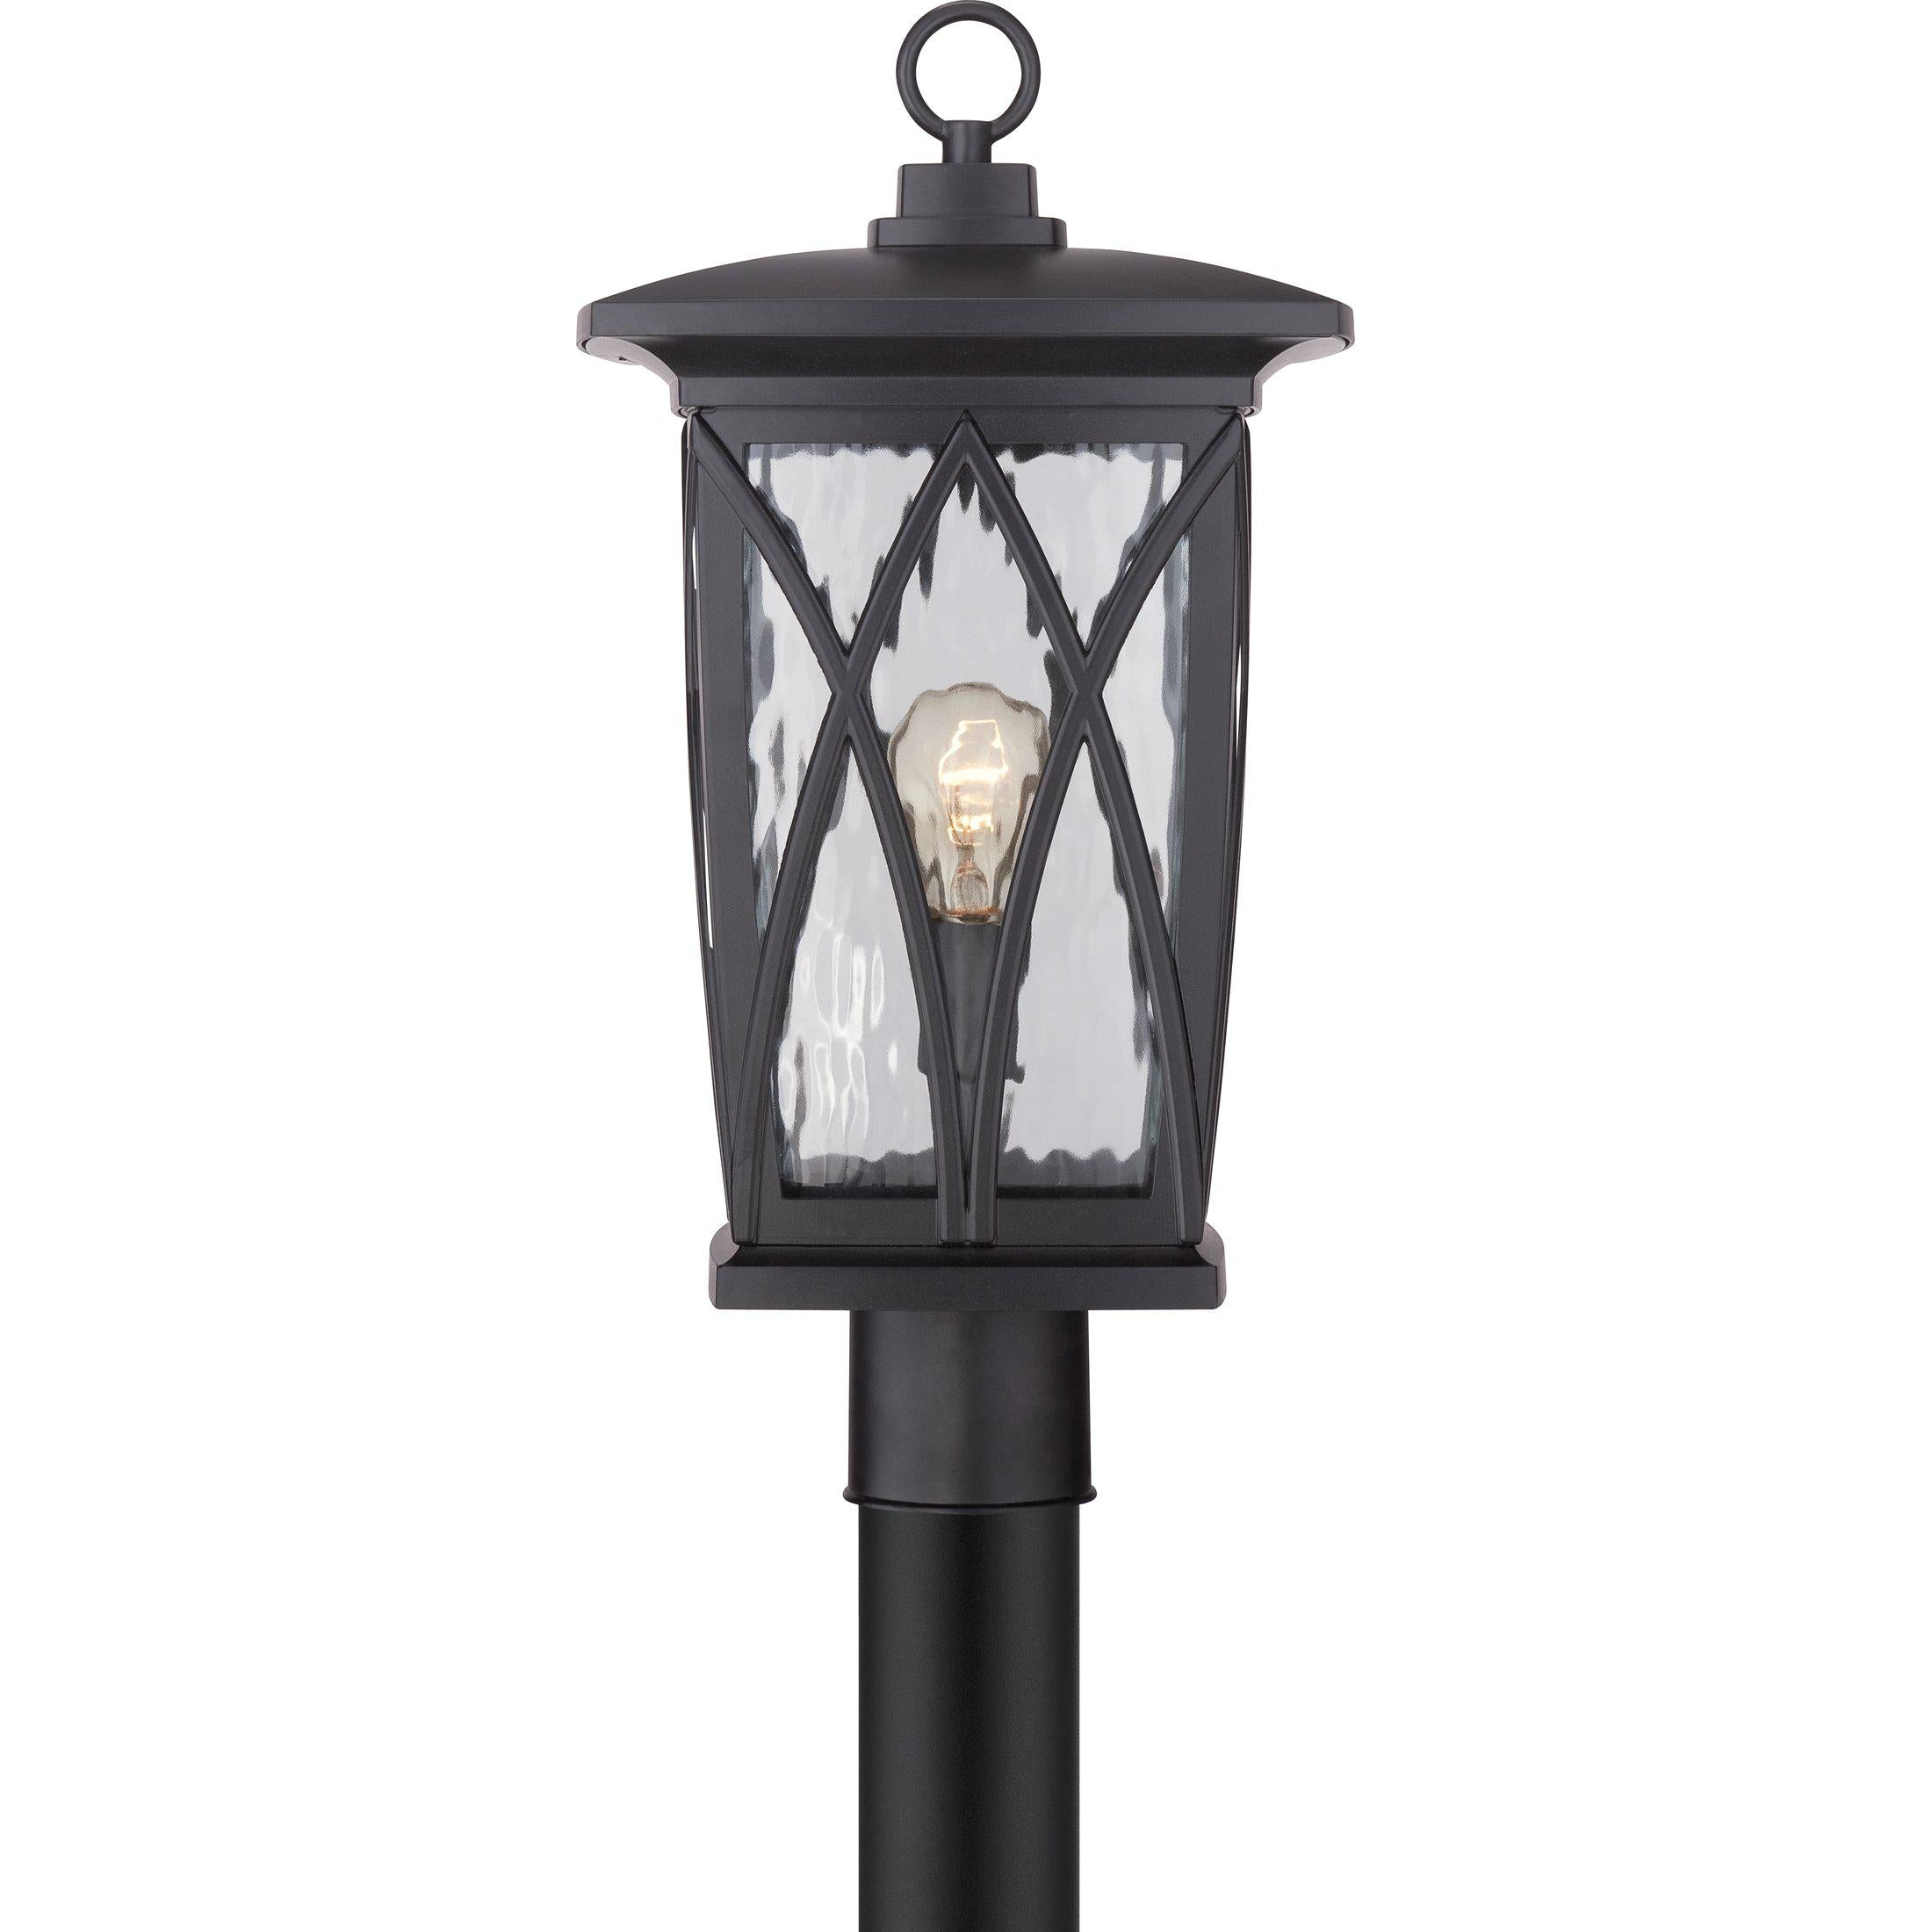 Quoizel Grover Outdoor Lantern, Post